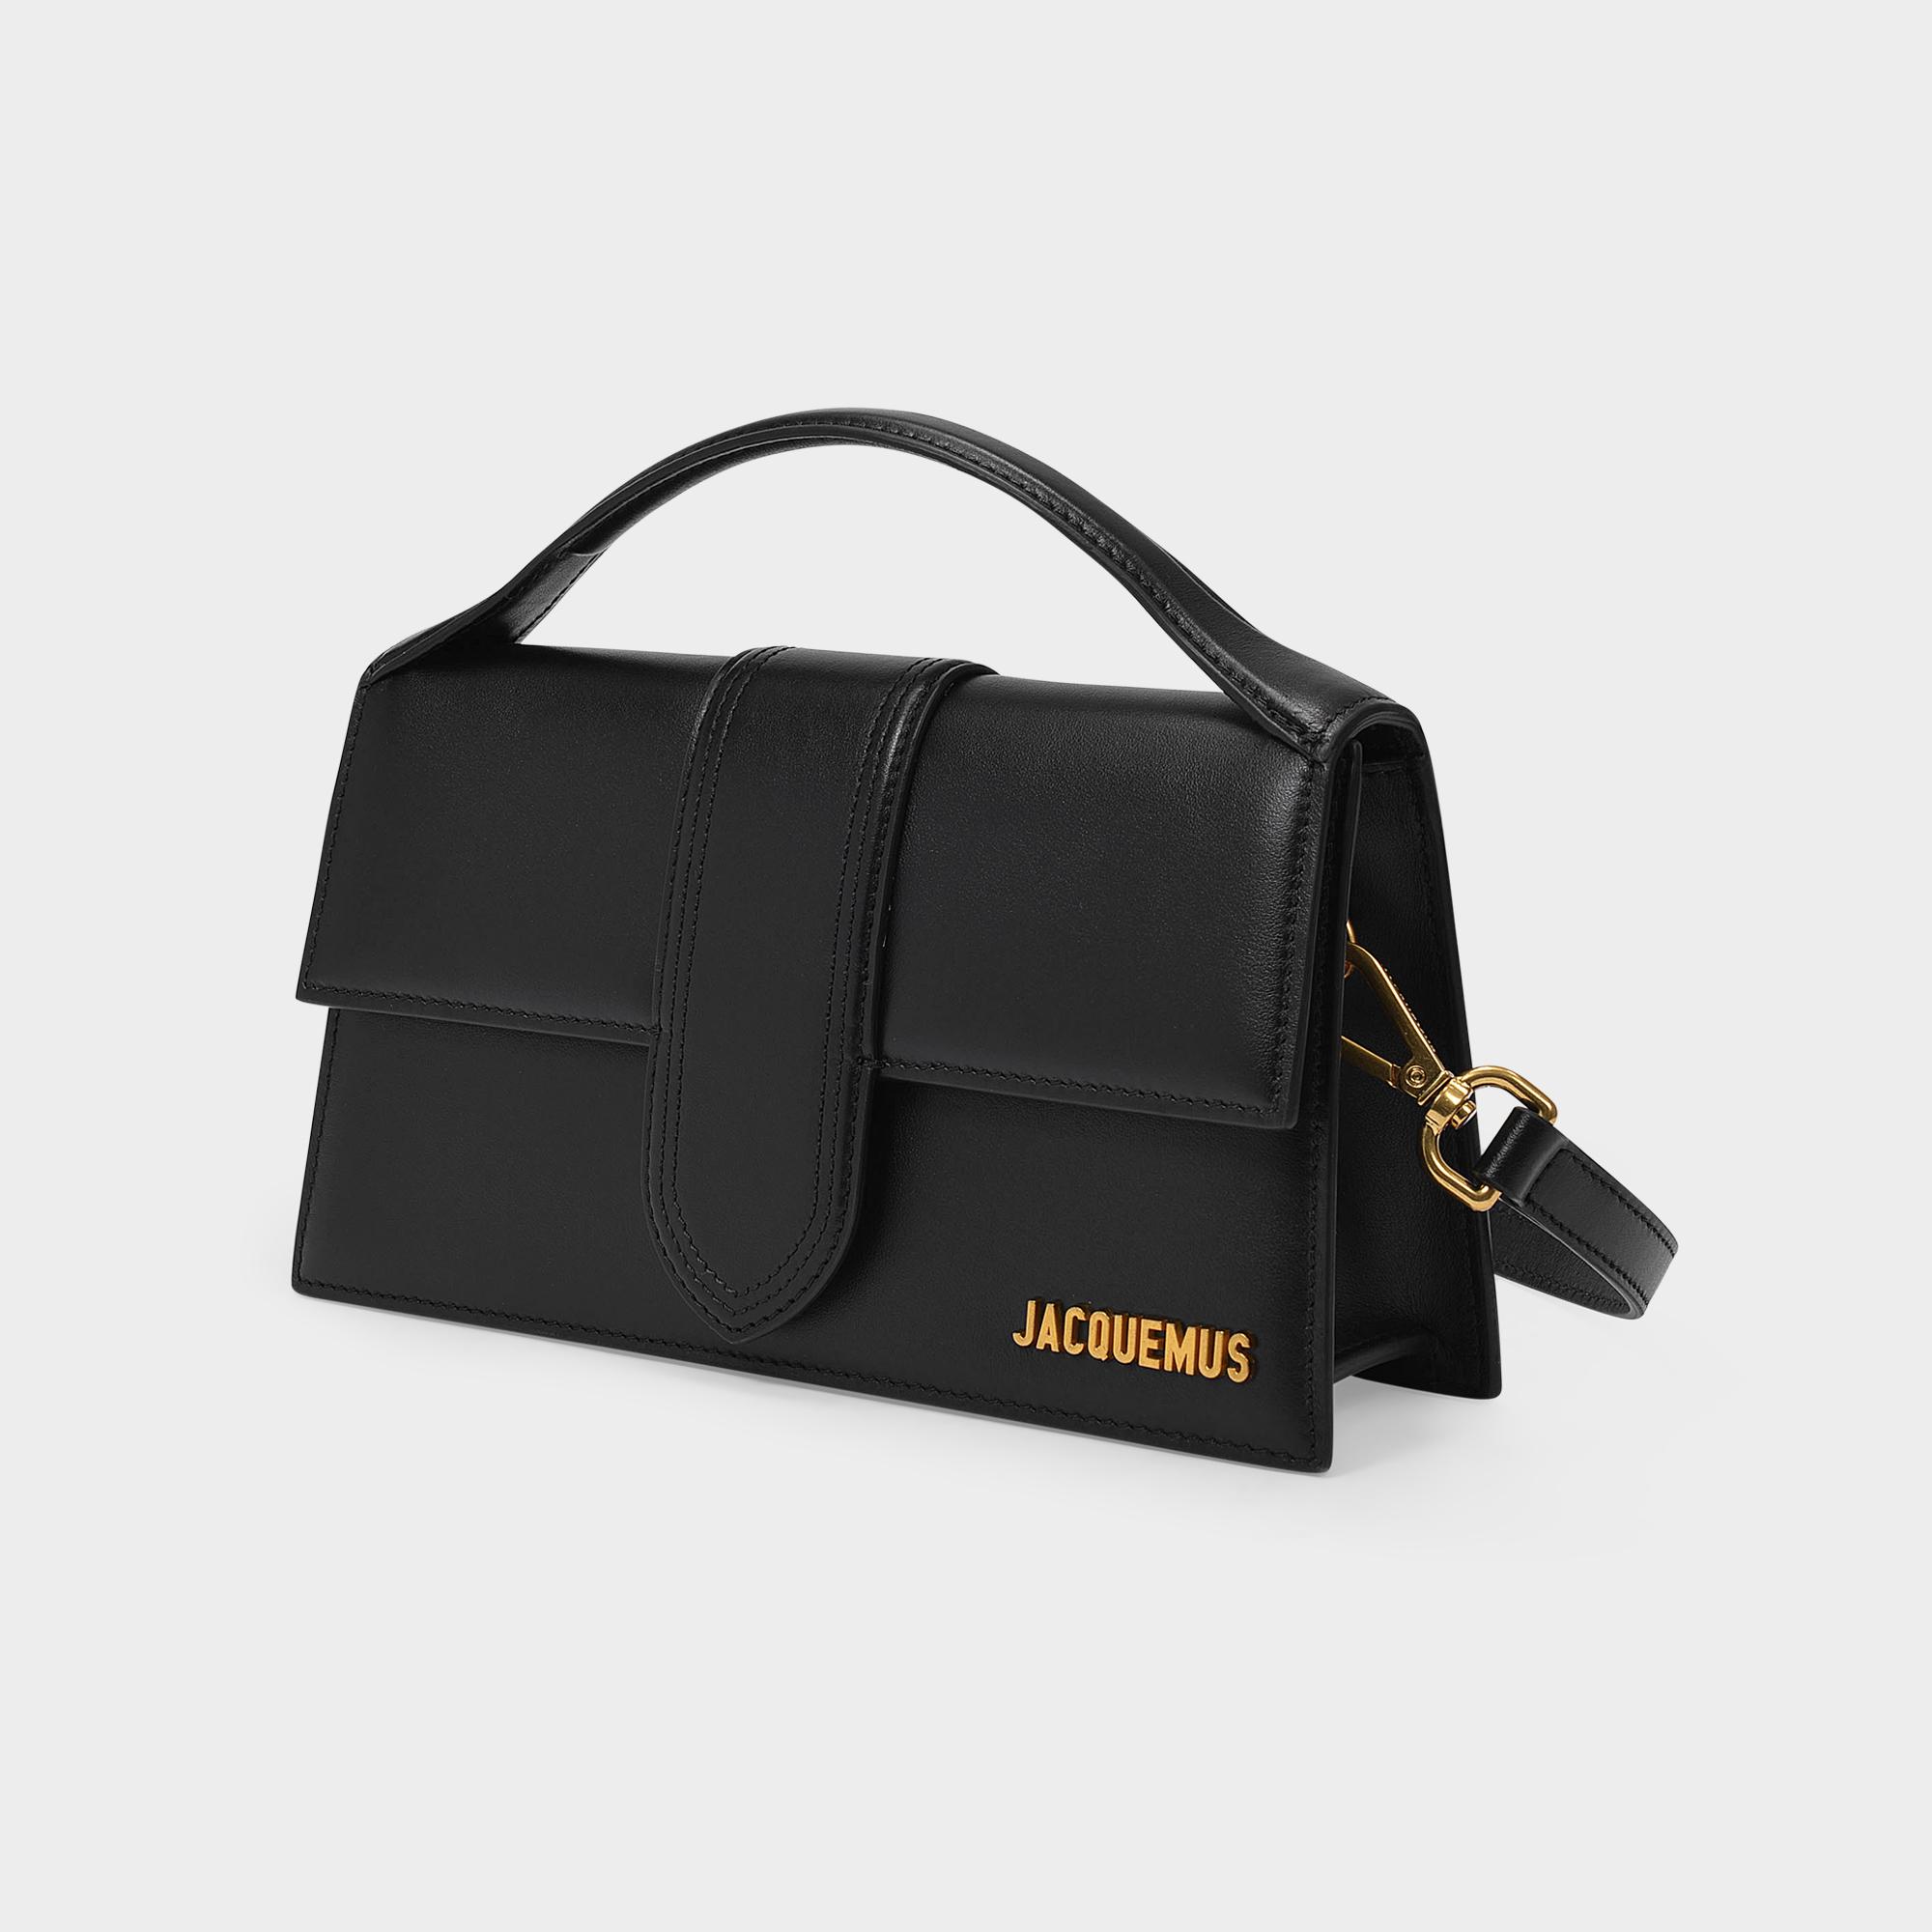 Jacquemus Handbag Le Grand Bambino In Black Smooth Leather - Lyst